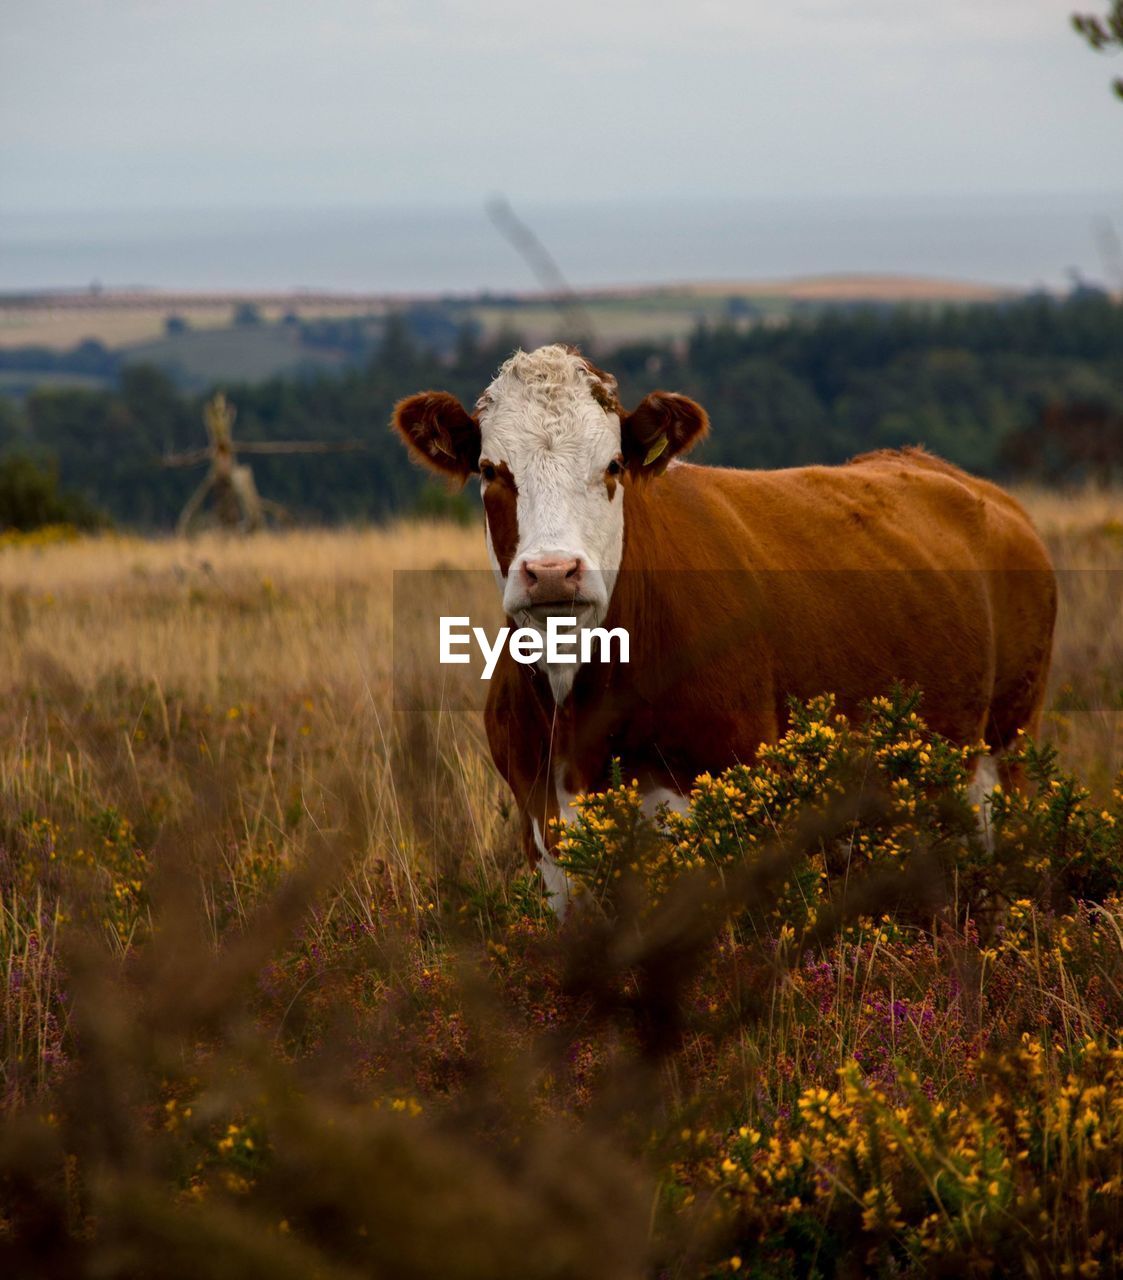 Cow standing in a field